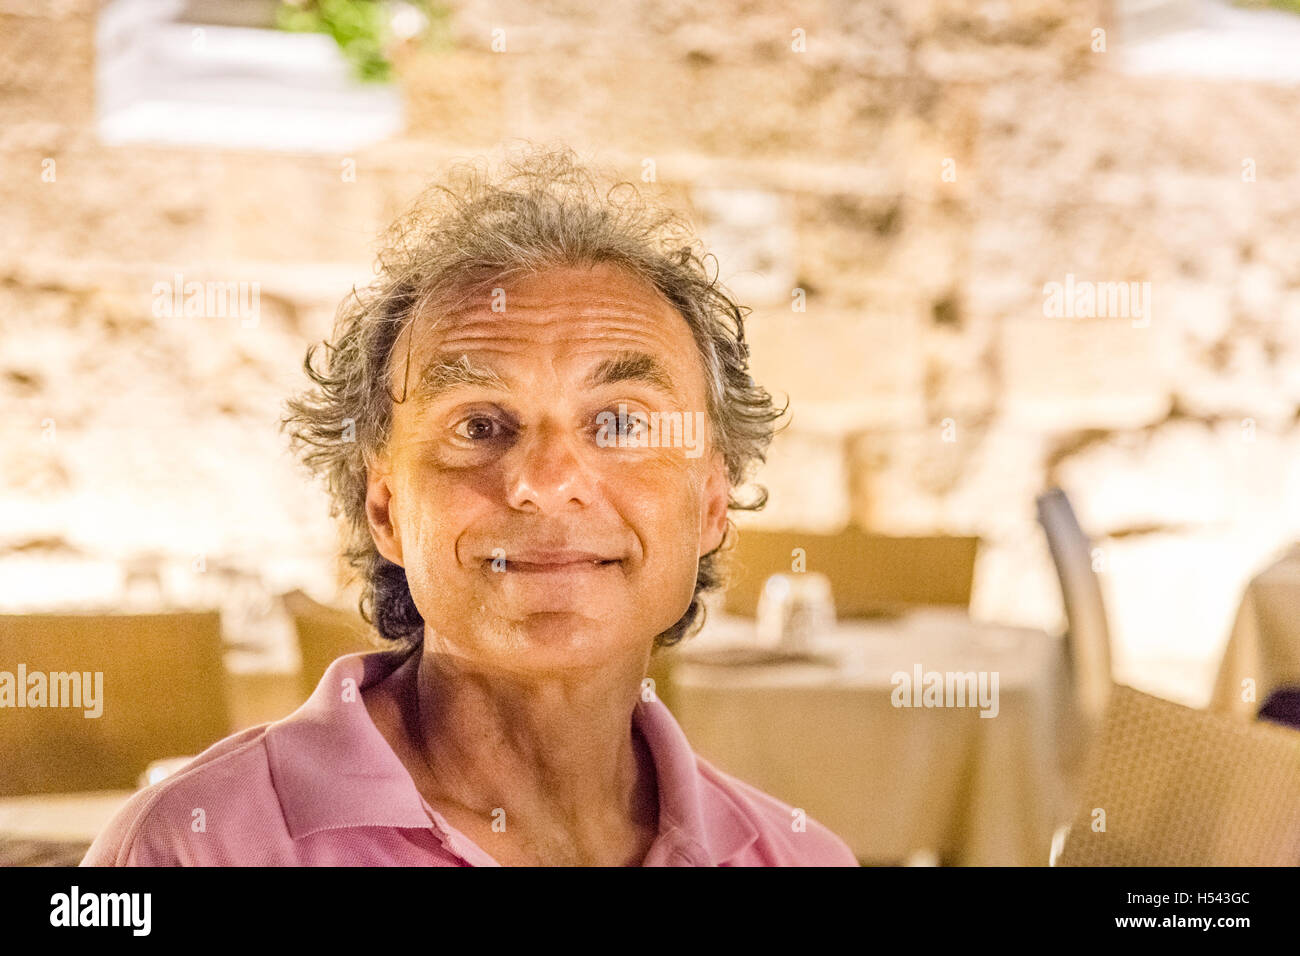 funny senior man making faces in a restaurant Stock Photo